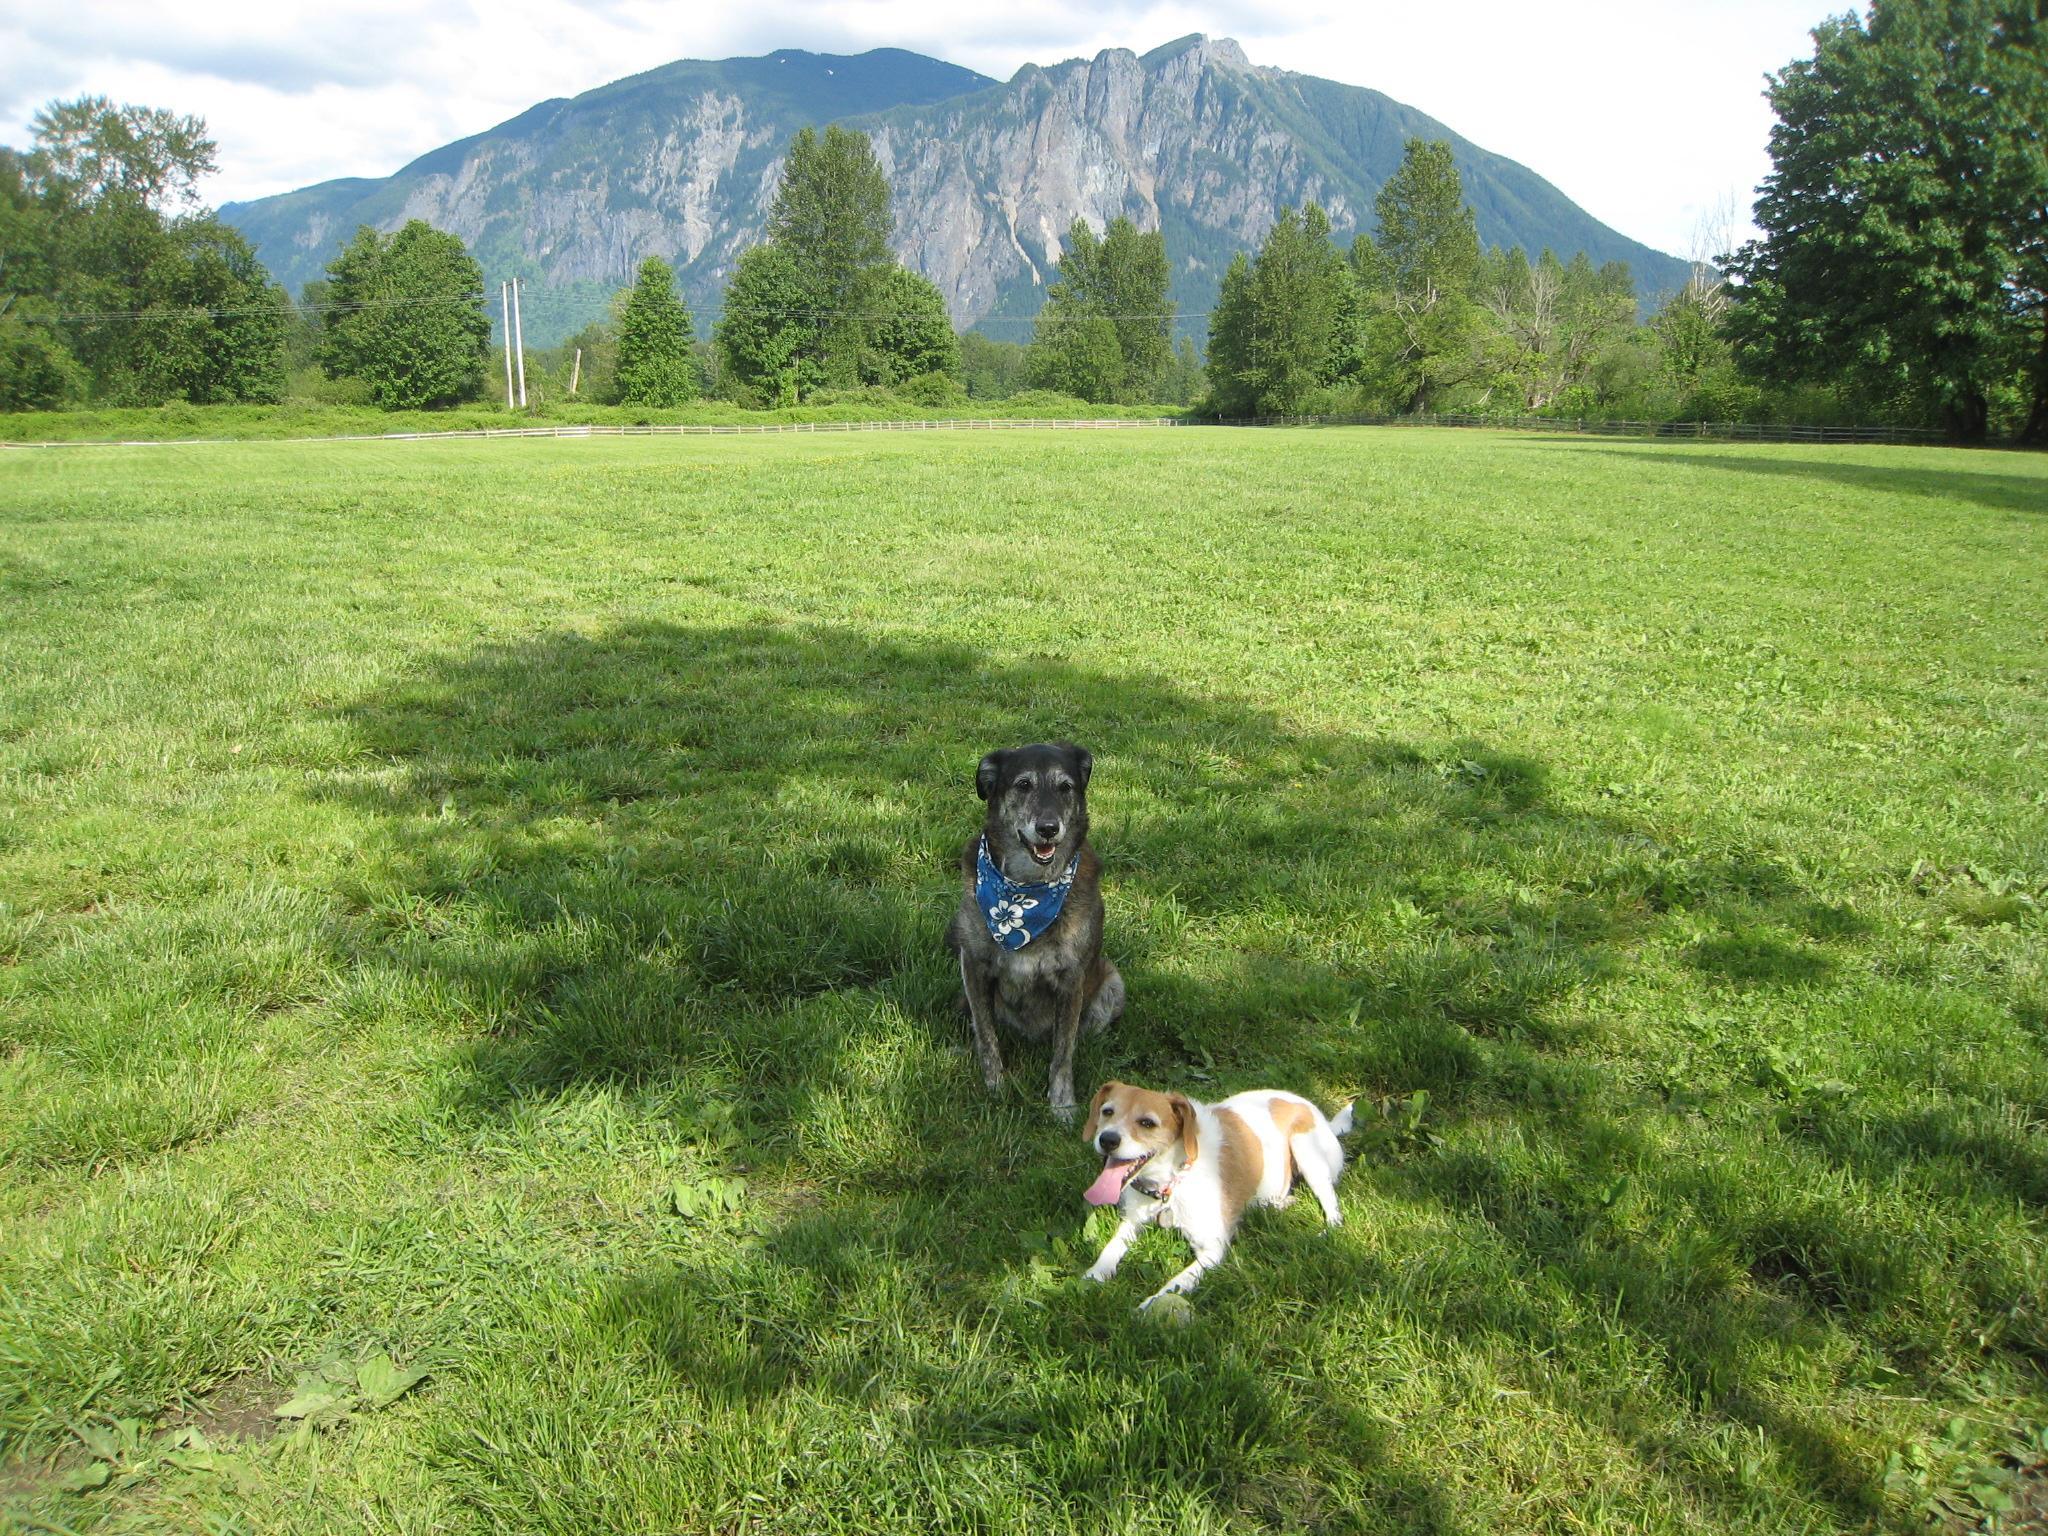 Snoqualmie Valley Pets: Six Boredom Busters for your Dog - Living Snoqualmie